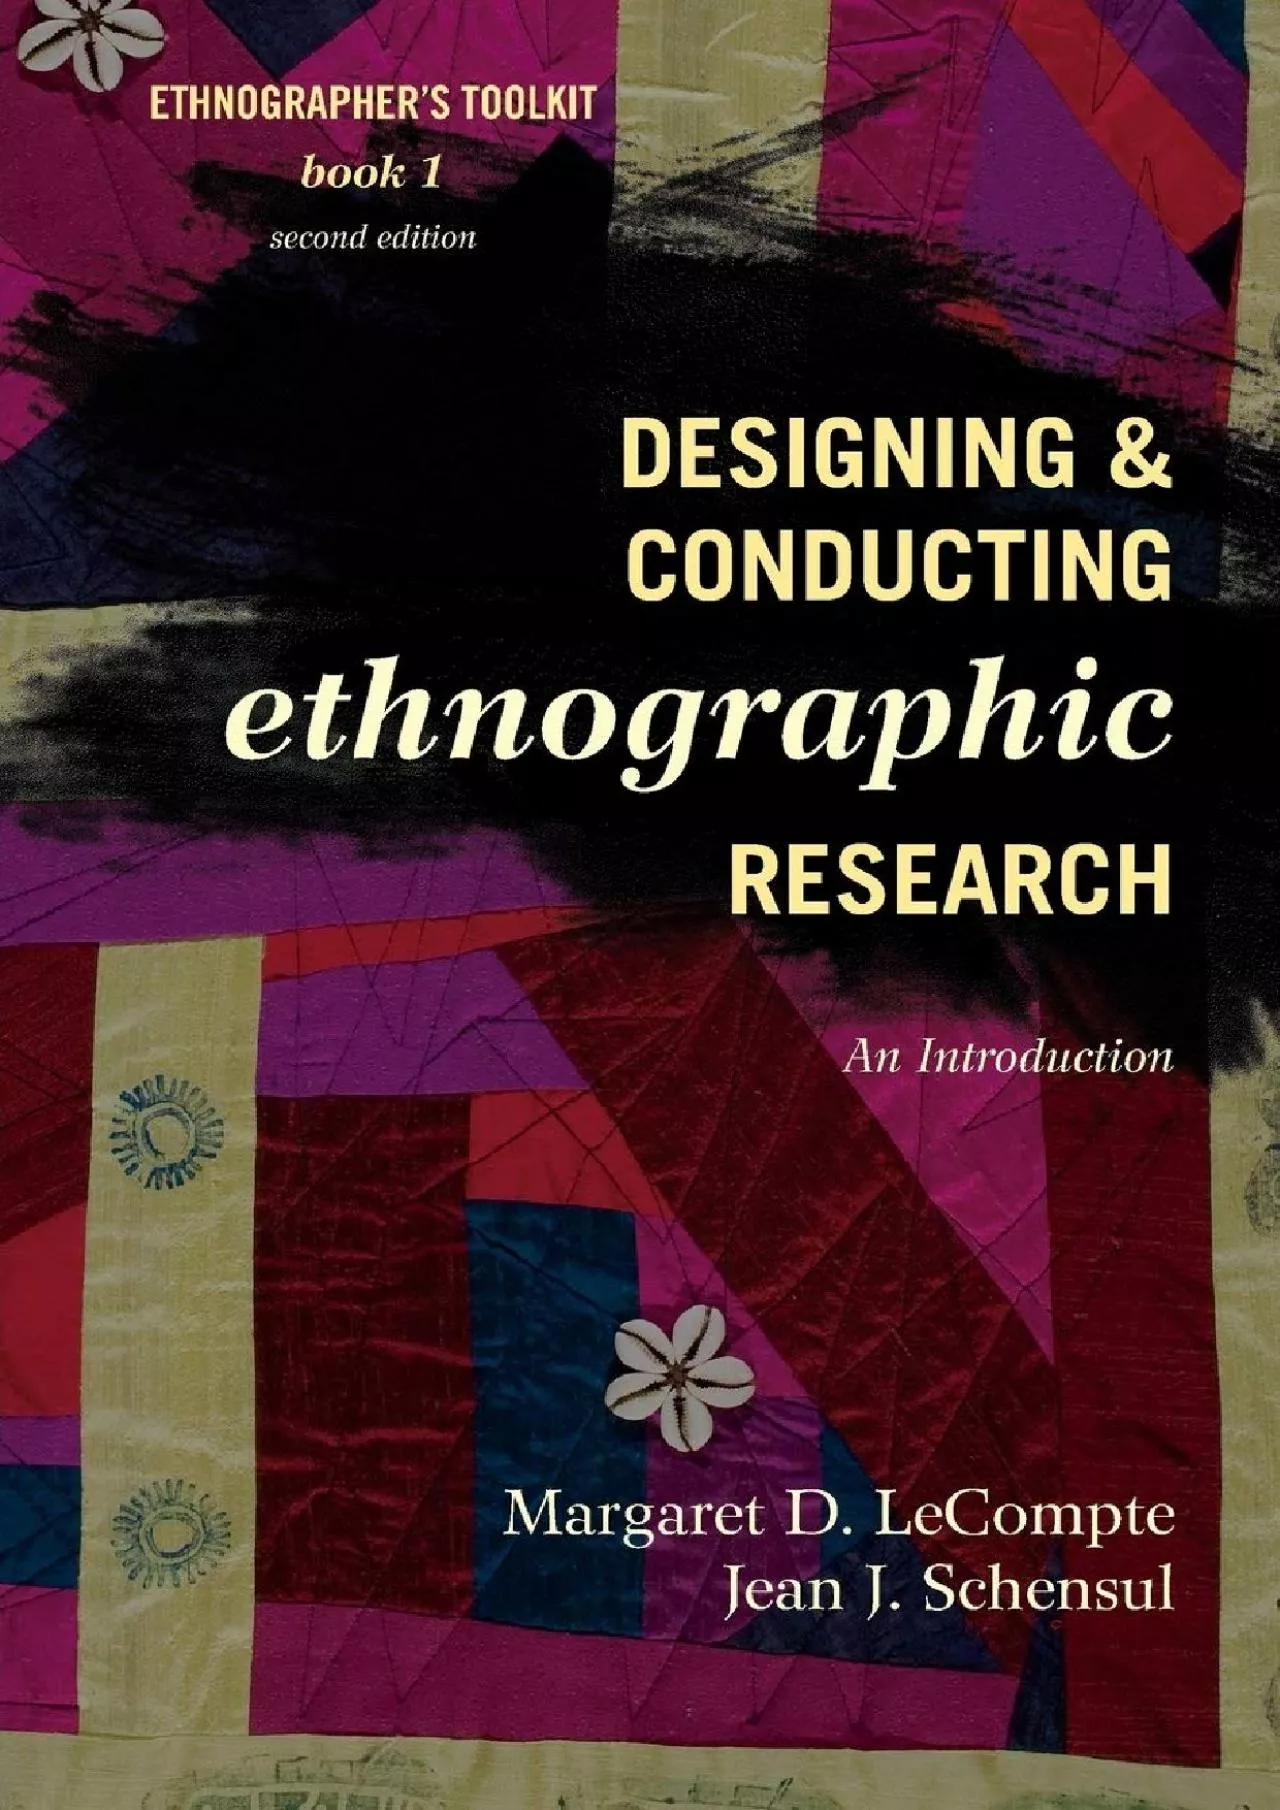 (READ)-Designing and Conducting Ethnographic Research: An Introduction (Volume 1) (Ethnographer\'s